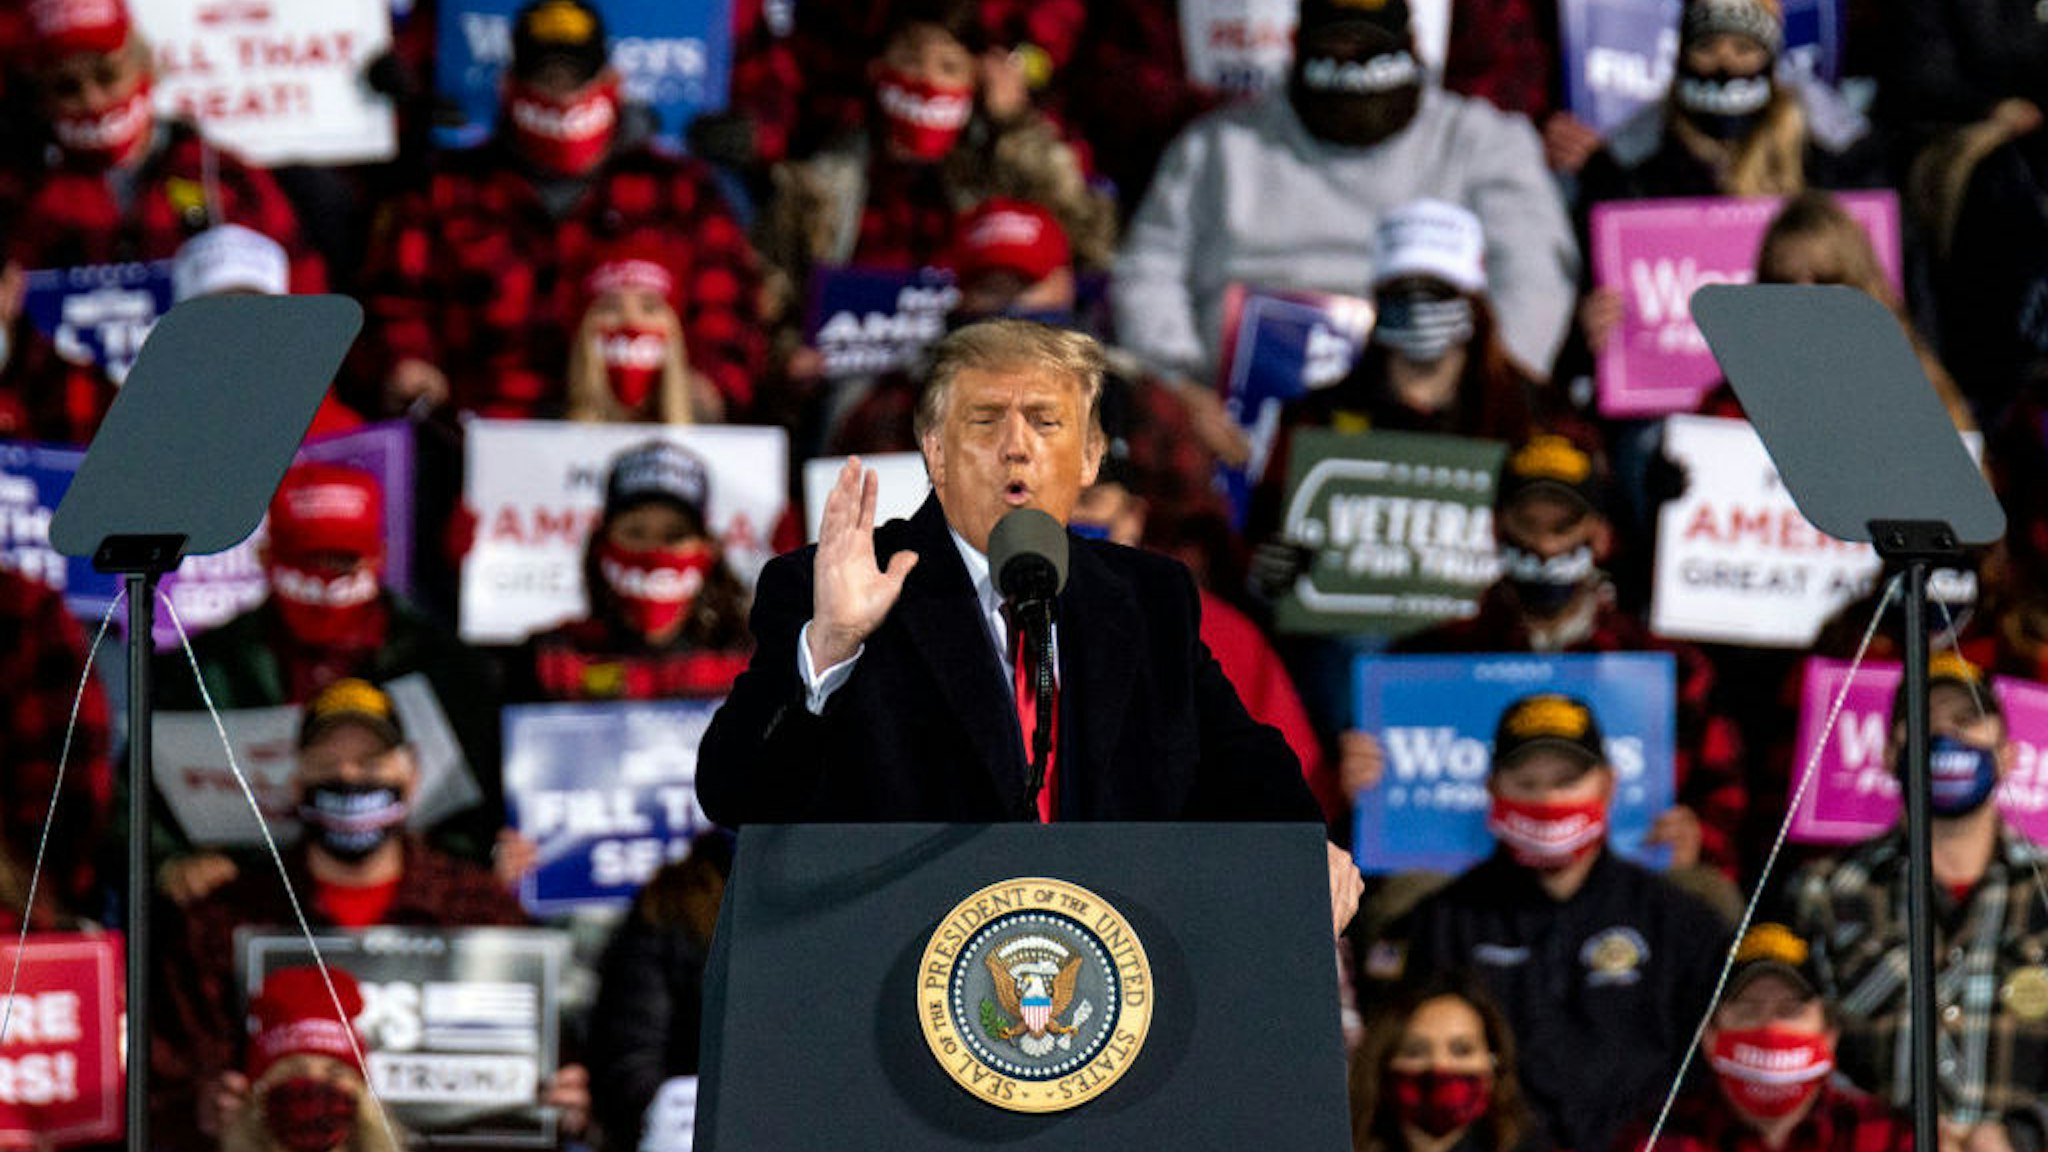 DULUTH, MN - SEPTEMBER 30: President Donald Trump speaks during a campaign rally at the Duluth International Airport on September 30, 2020 in Duluth, Minnesota. The rally is Trump's first after last night's Presidential Debate. (Photo by Stephen Maturen/Getty Images)